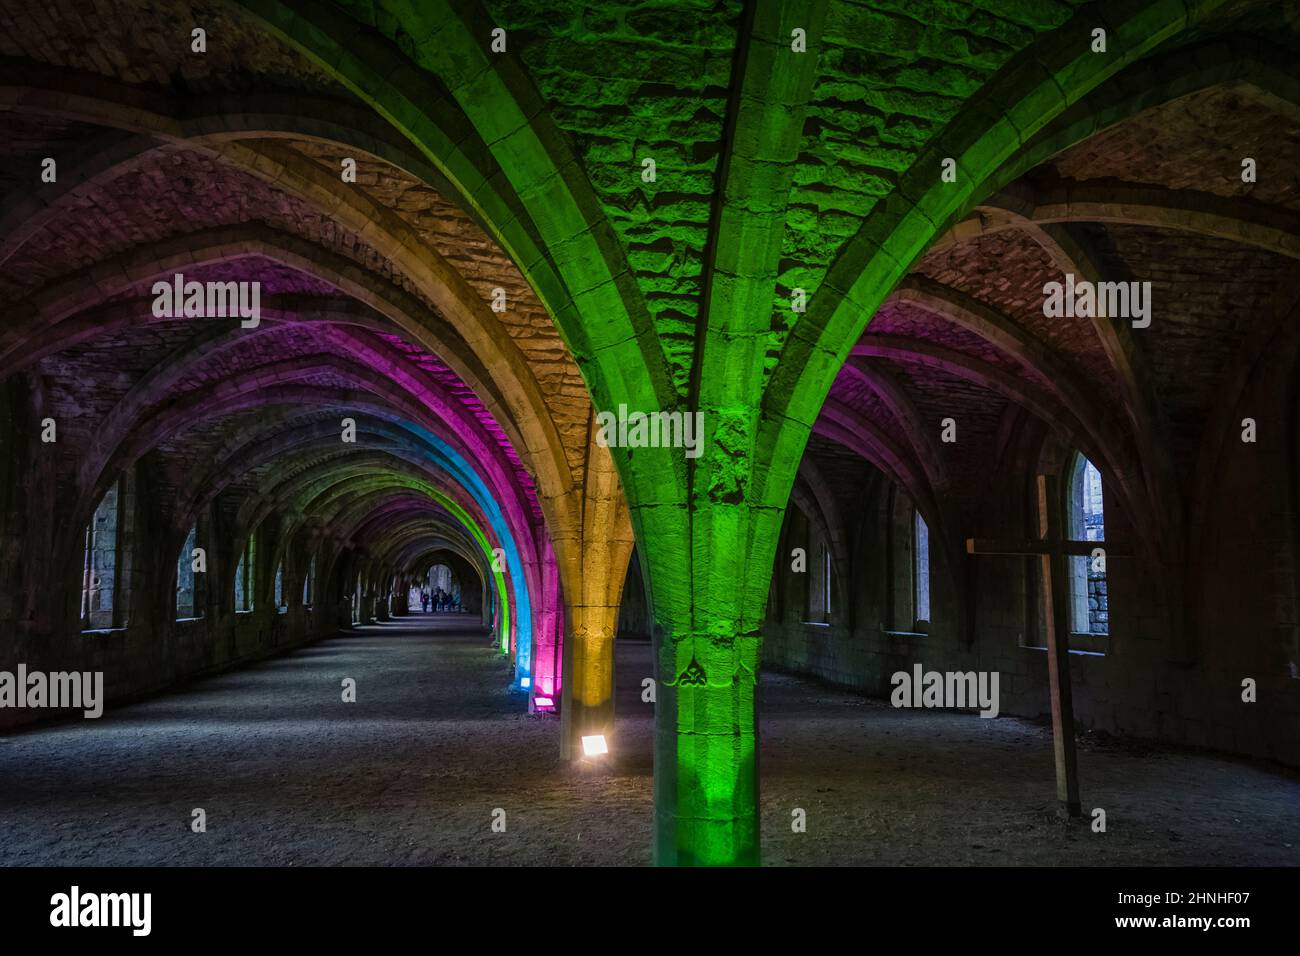 Floodlit cloisters at Fountains Abbey, Yorkshire, UK Stock Photo